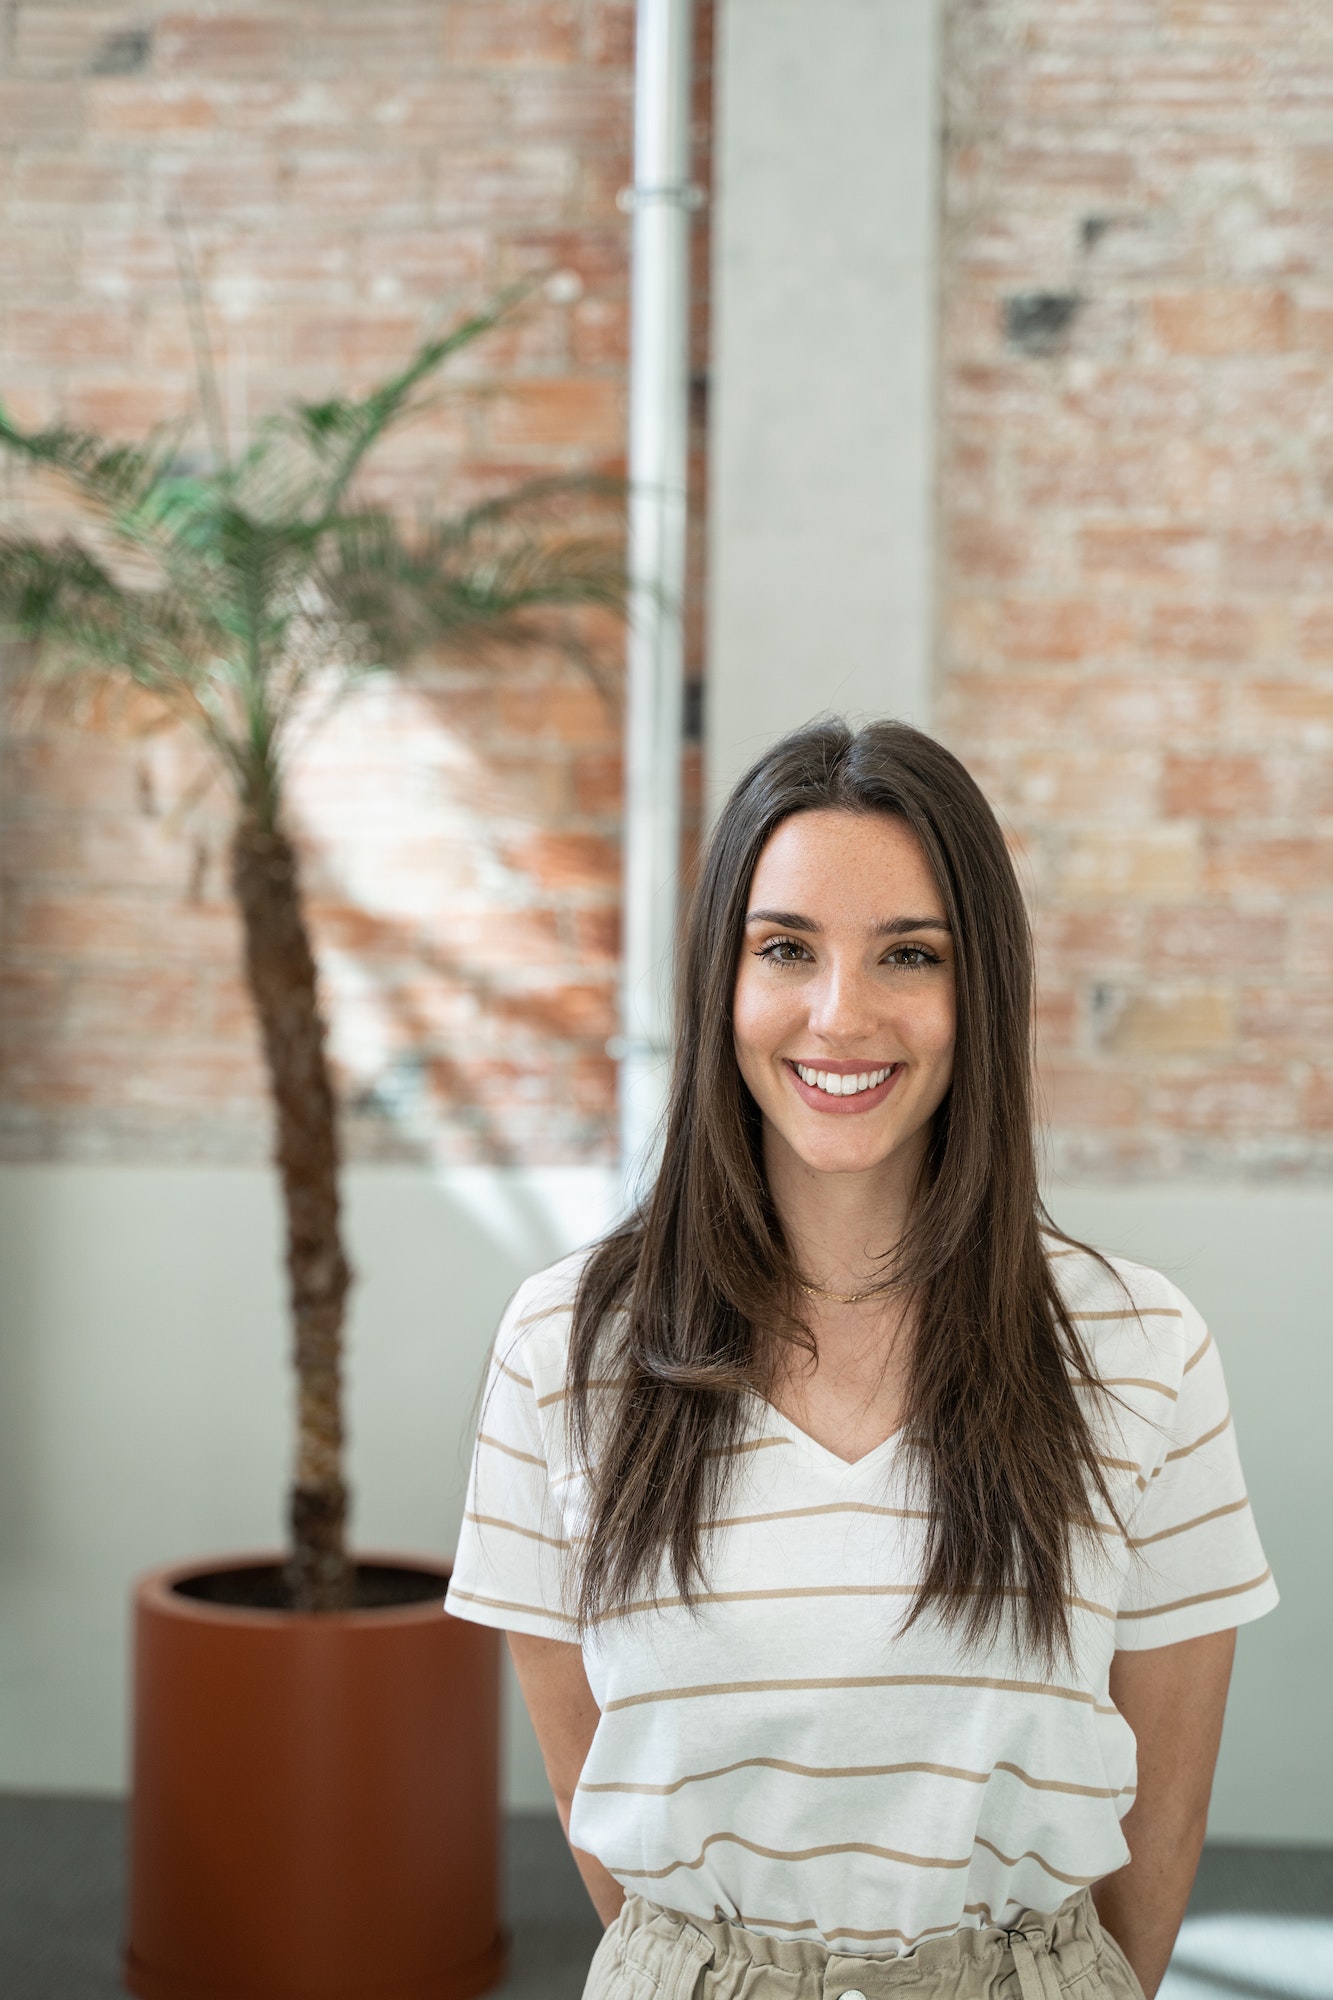 Portrait of young woman employee in a modern office with brick walls doing internship